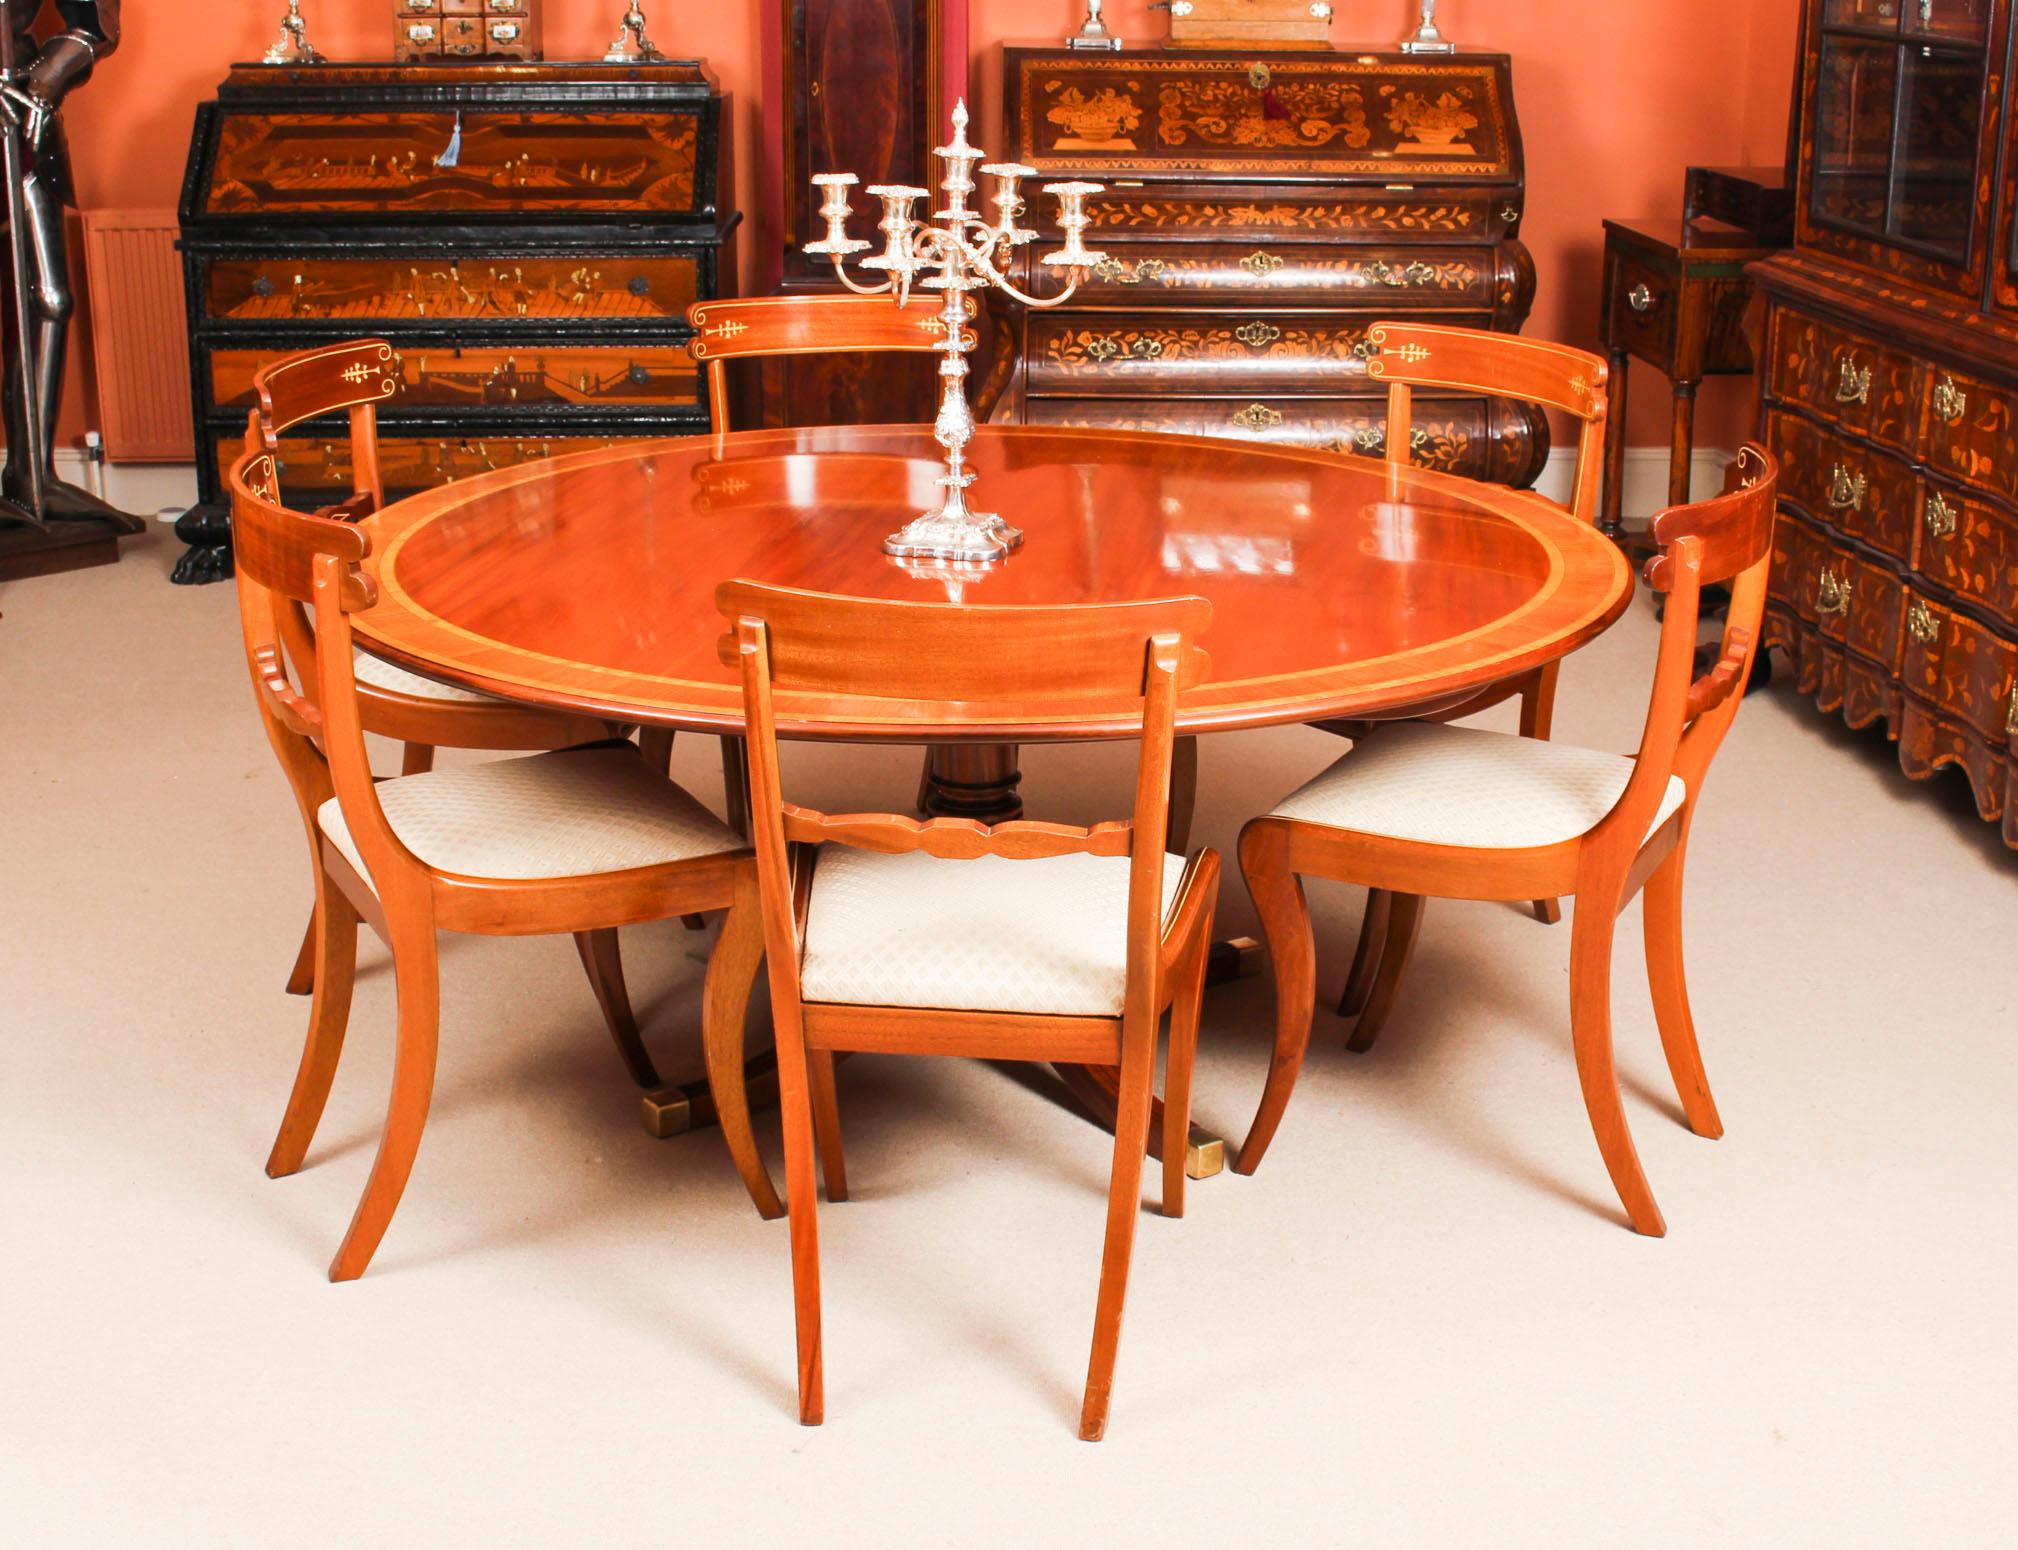 This is a fabulous vintage dining set which comprises a Regency style dining table and six Regency style sabre leg dining chairs, all made by the master cabinet maker William Tillman in the 1980s and bearing his label. 

The beautiful circular